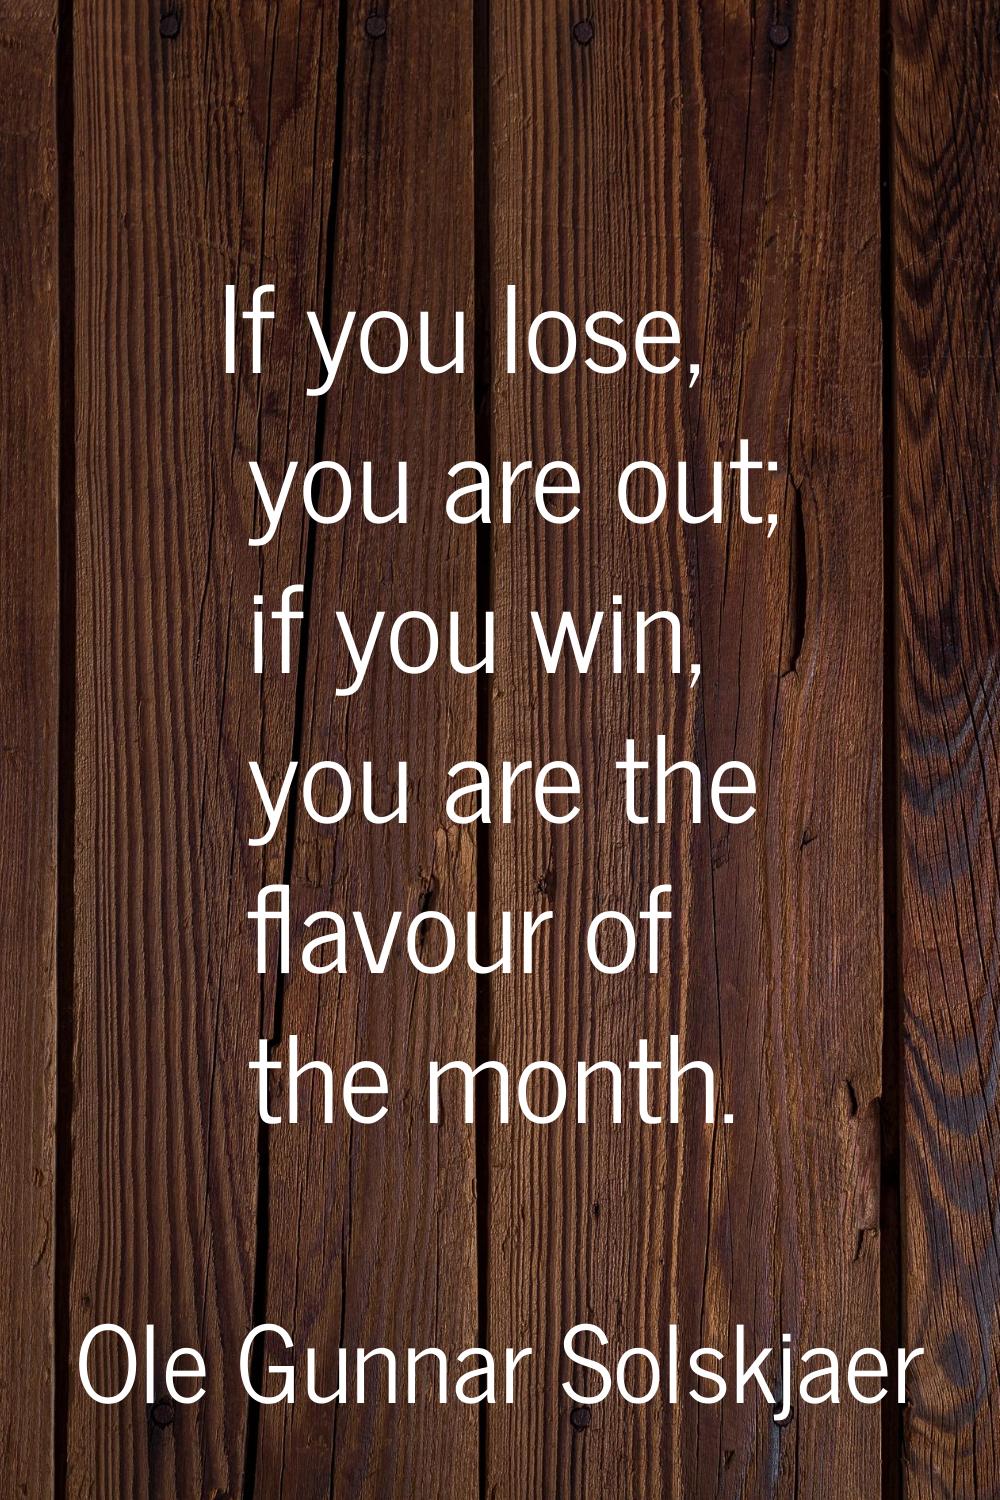 If you lose, you are out; if you win, you are the flavour of the month.